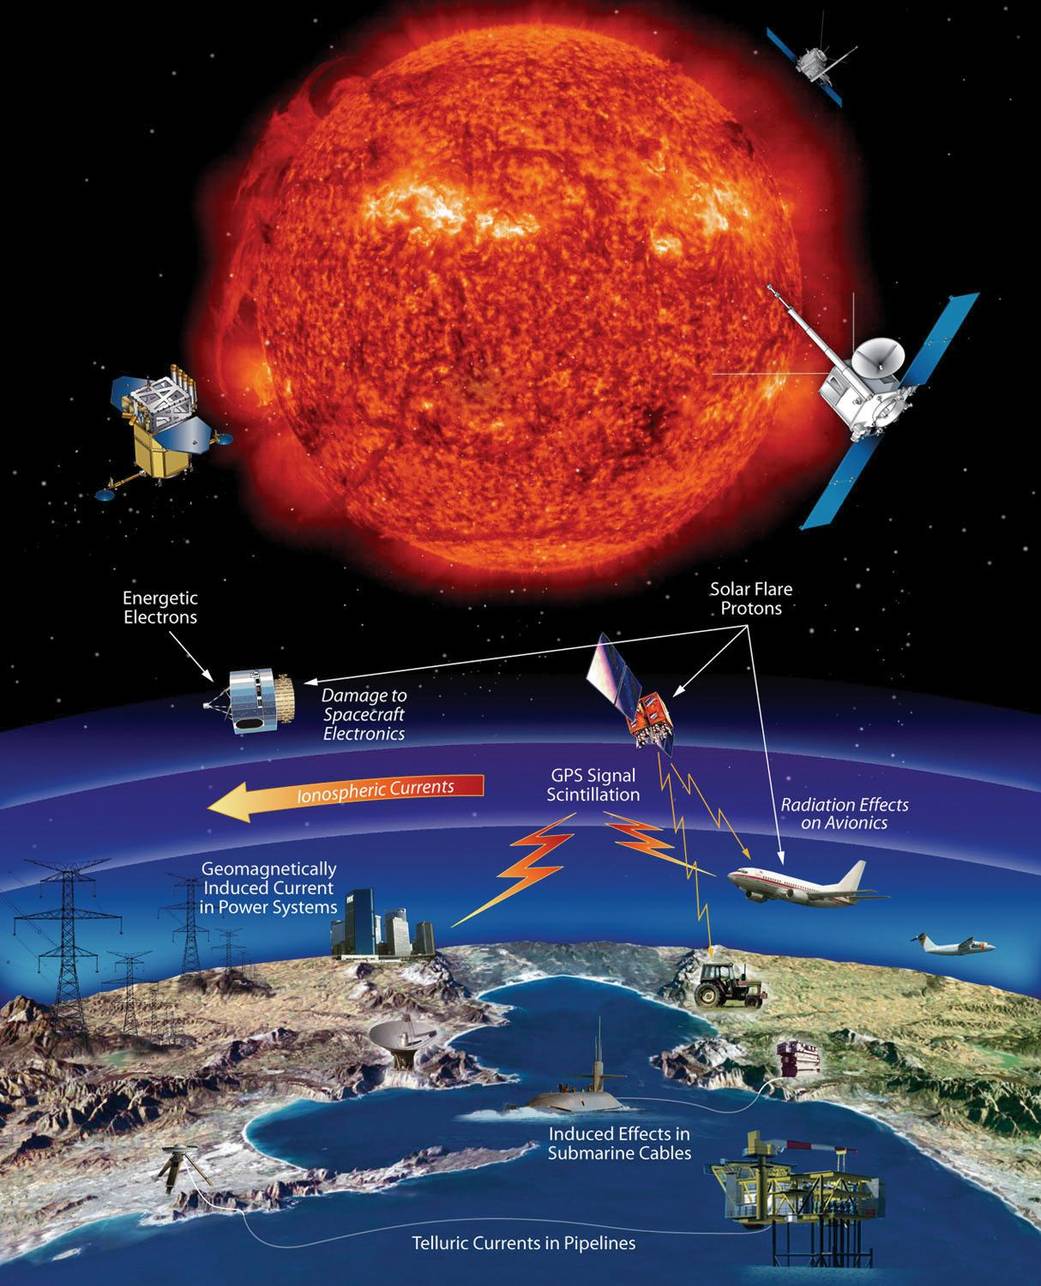 Technological Affects of Space Weather Events